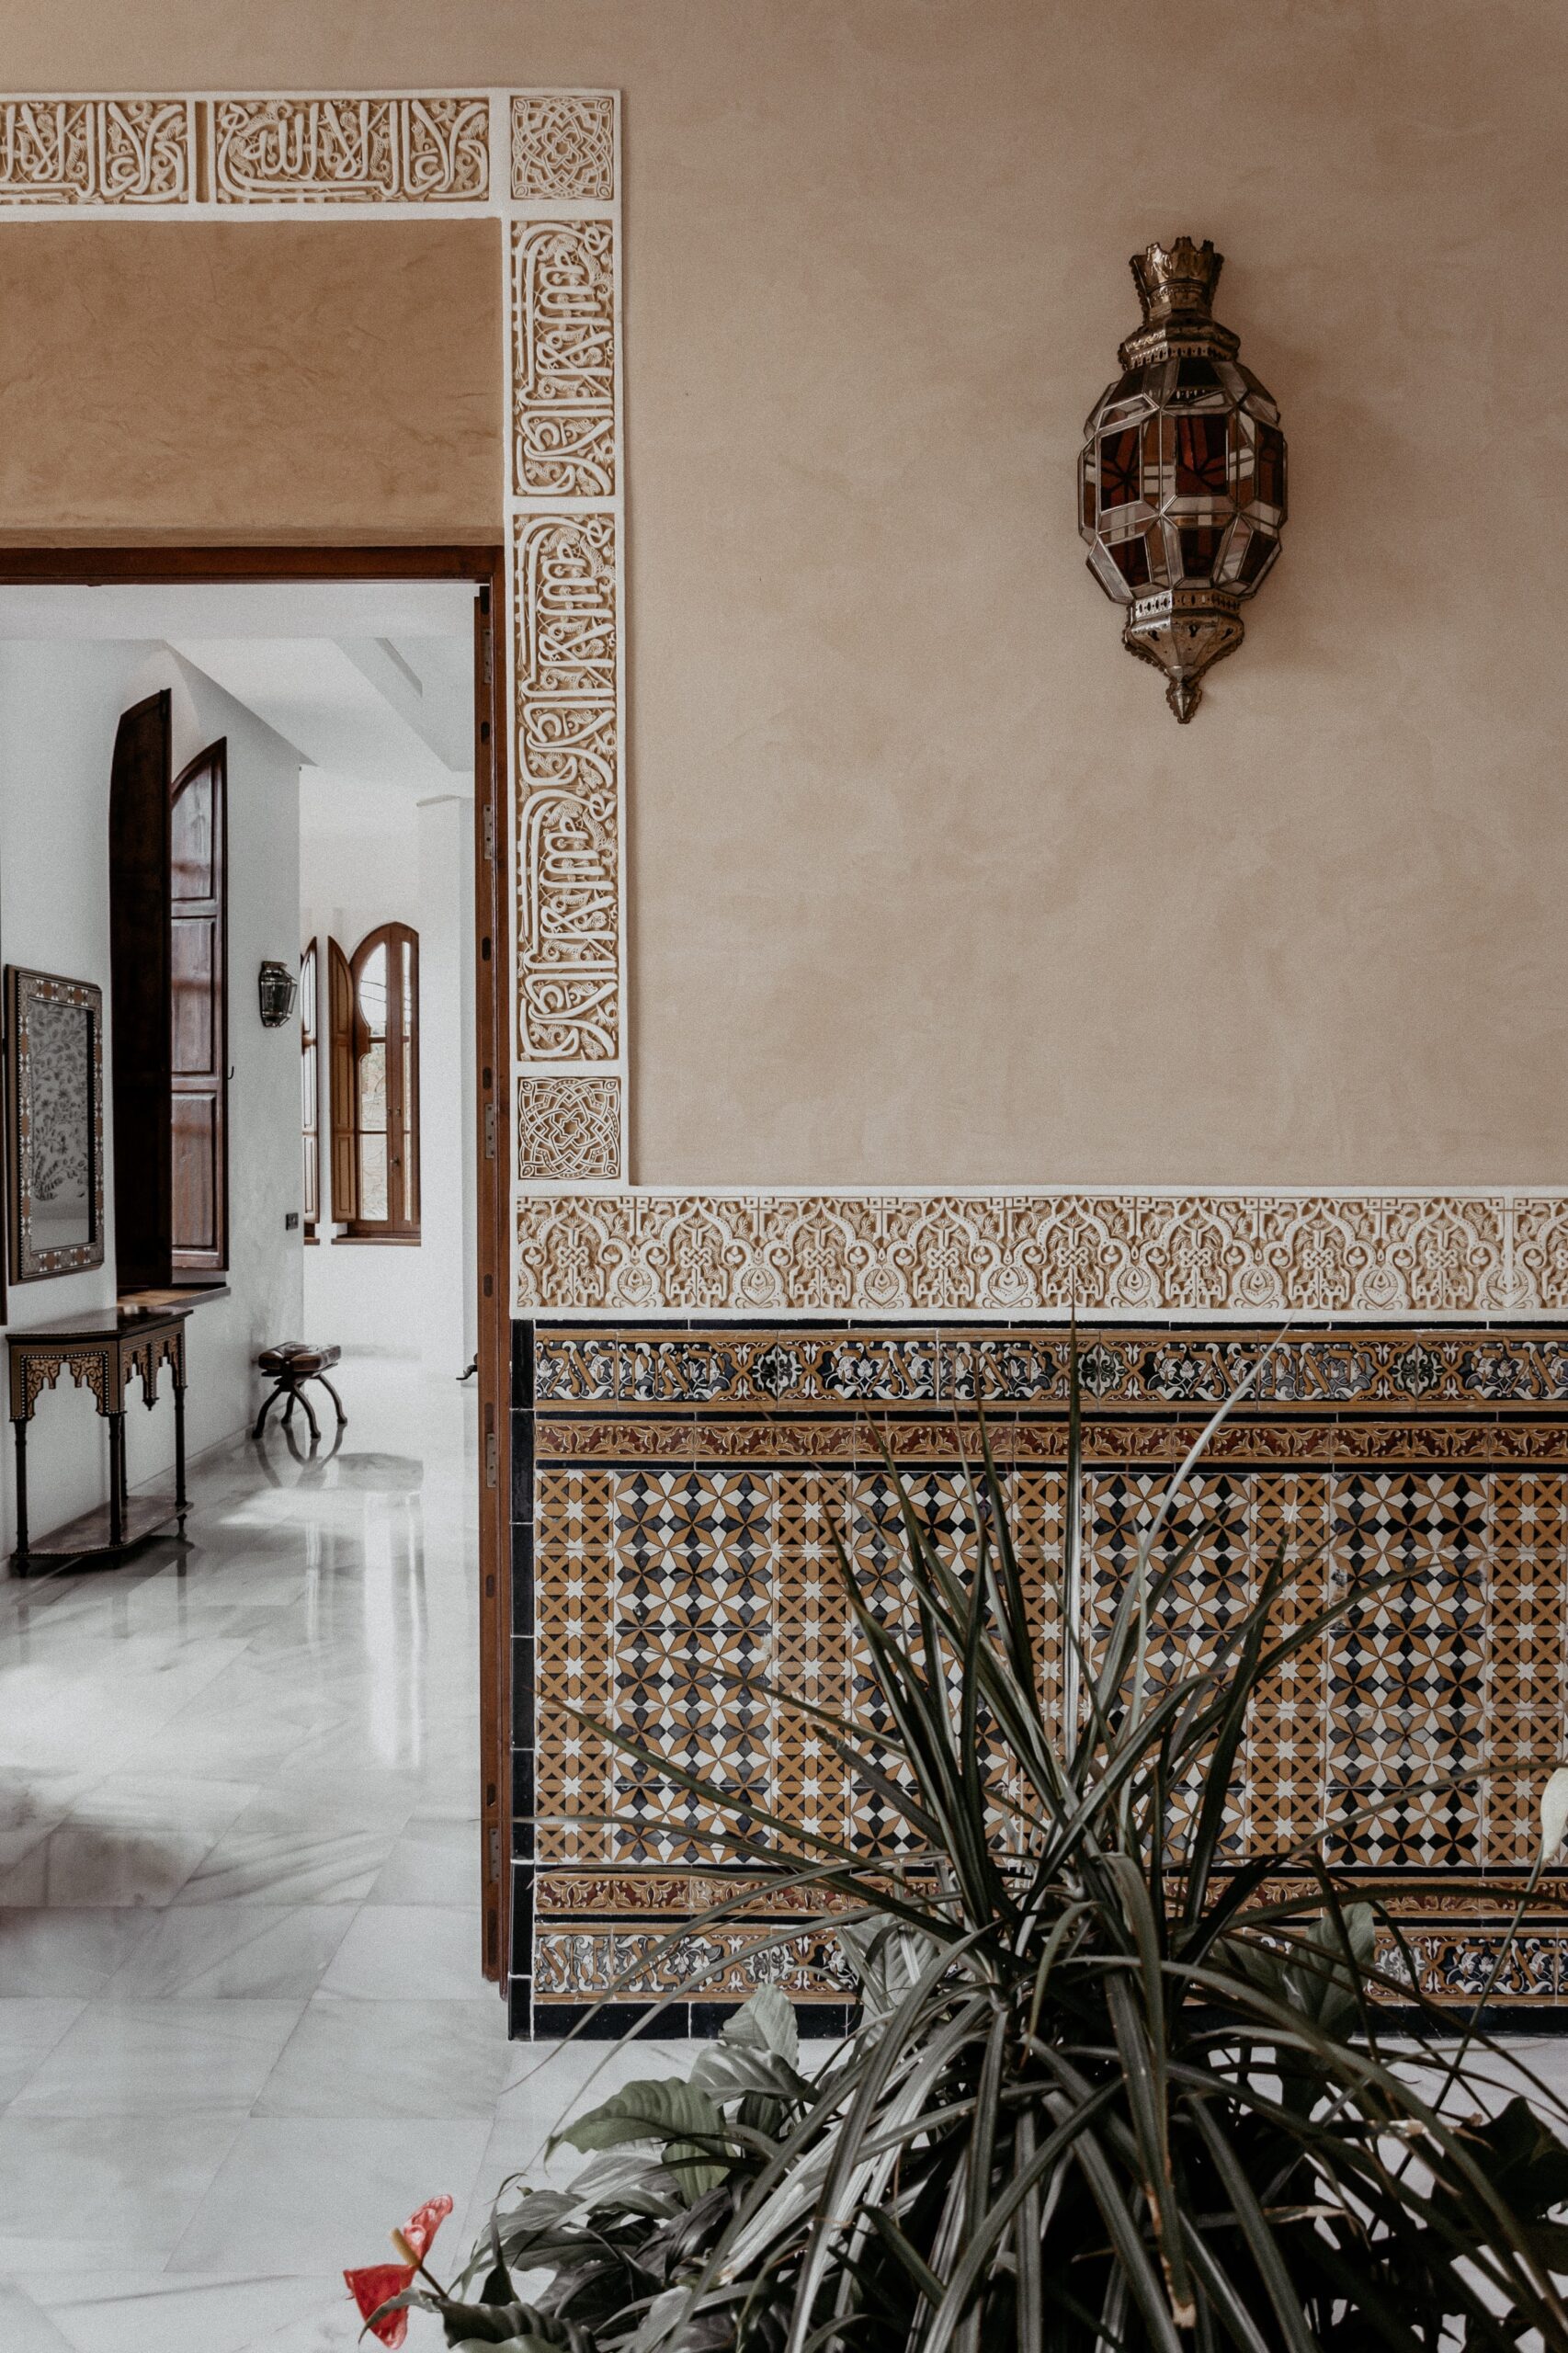 Andalusian home interior - image by Camille Brodard